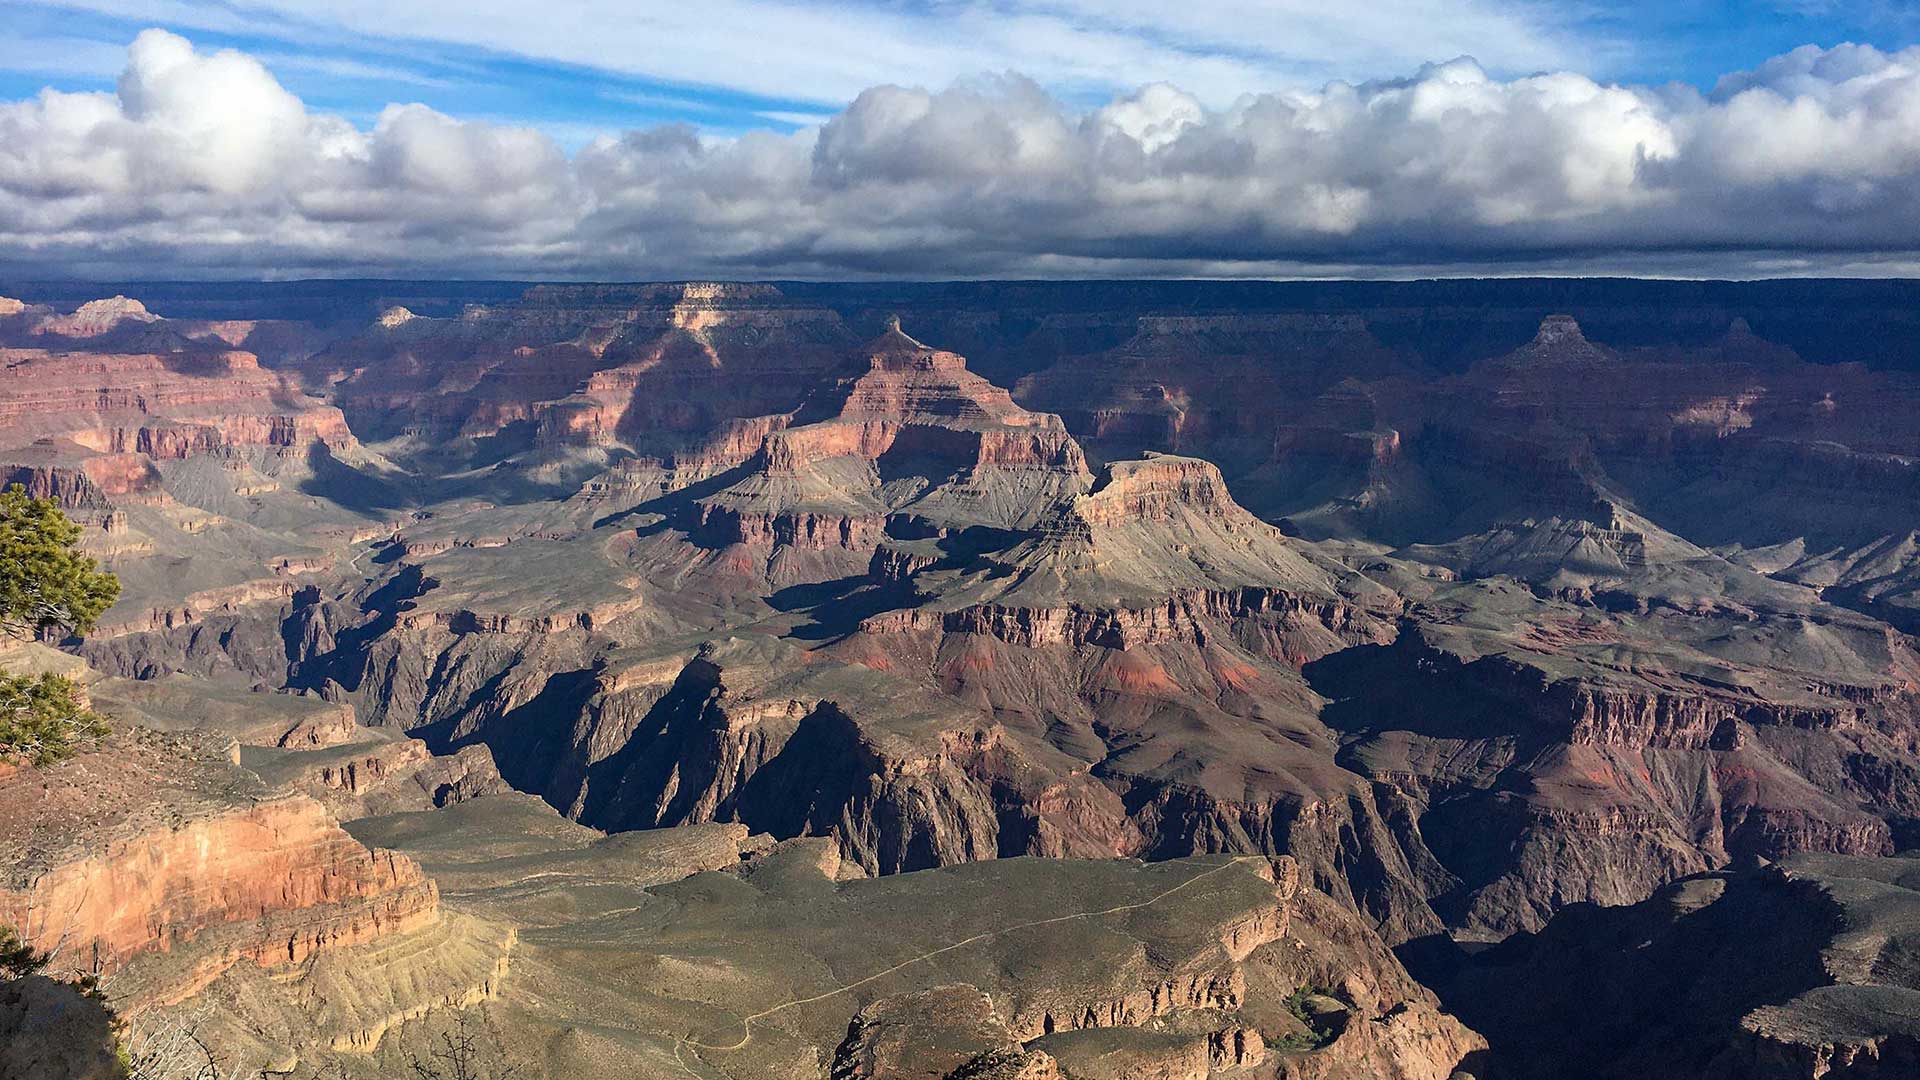 March 18, 2020 view from Yavapai Point on the Grand Canyon's South Rim. 